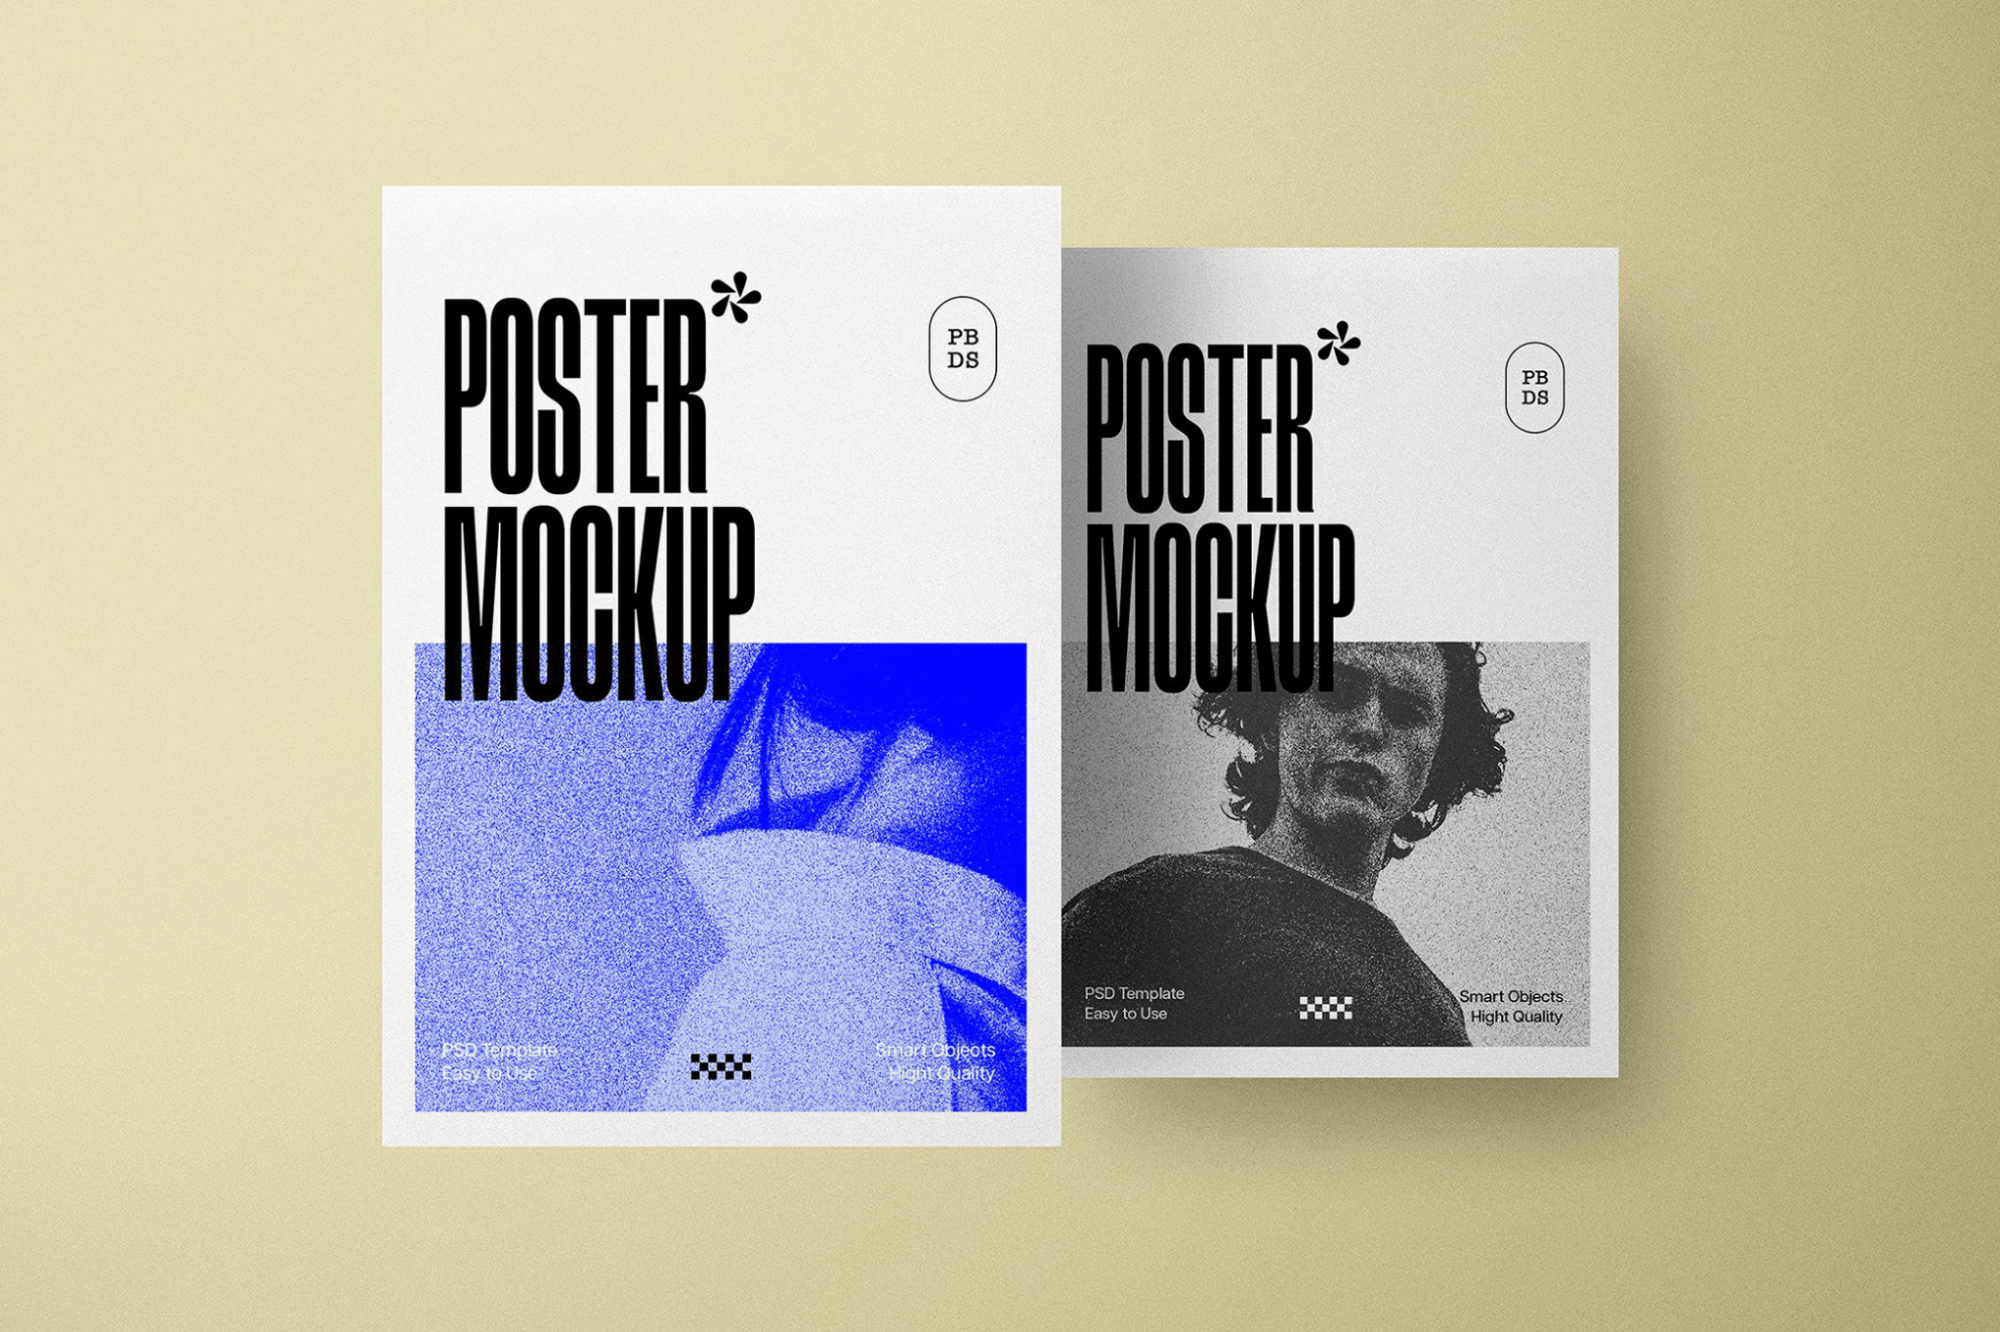 Two high-quality realistic poster mockups on a neutral backdrop featuring minimalist design elements and smart object layers.